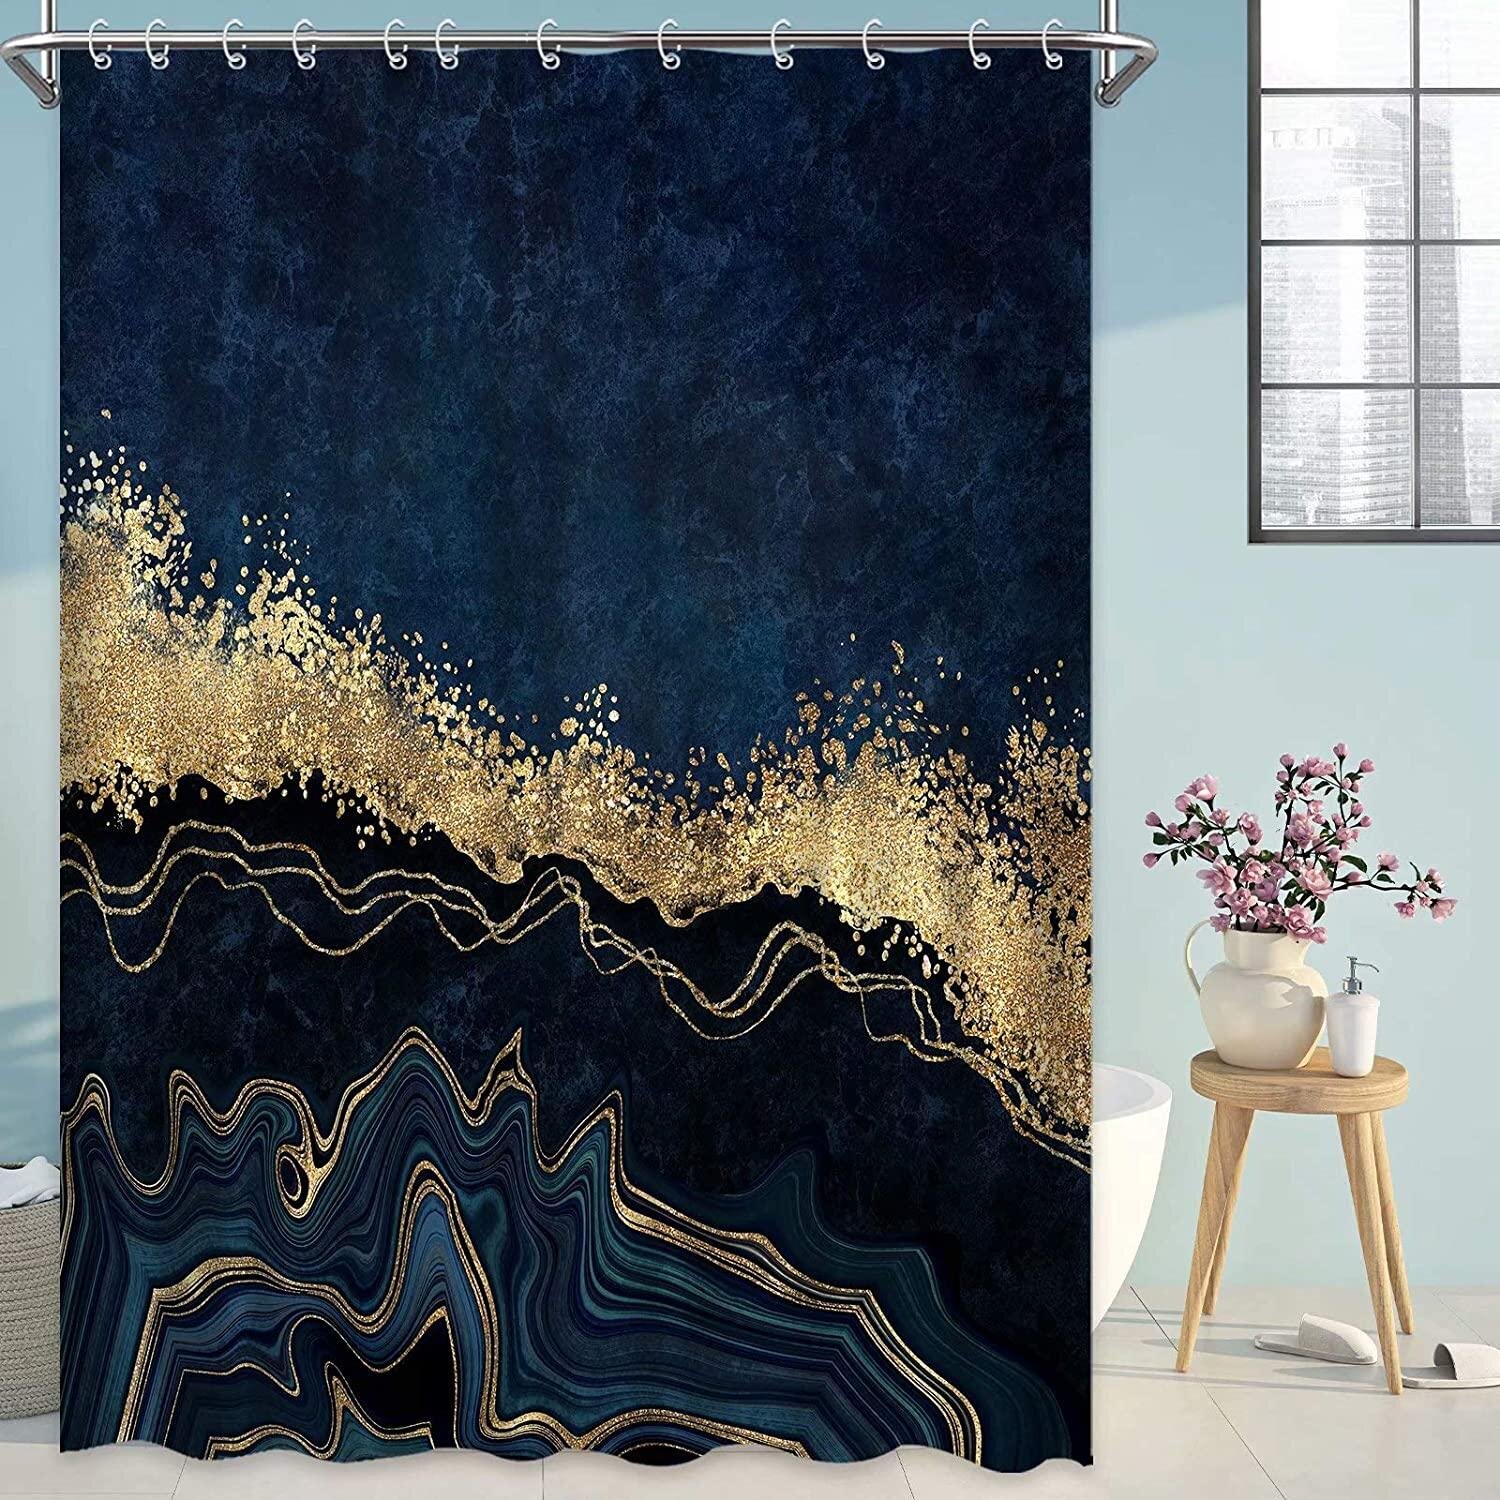 Natural Abstract Marble Texture Design Shower Curtain Liner Waterproof Fabric